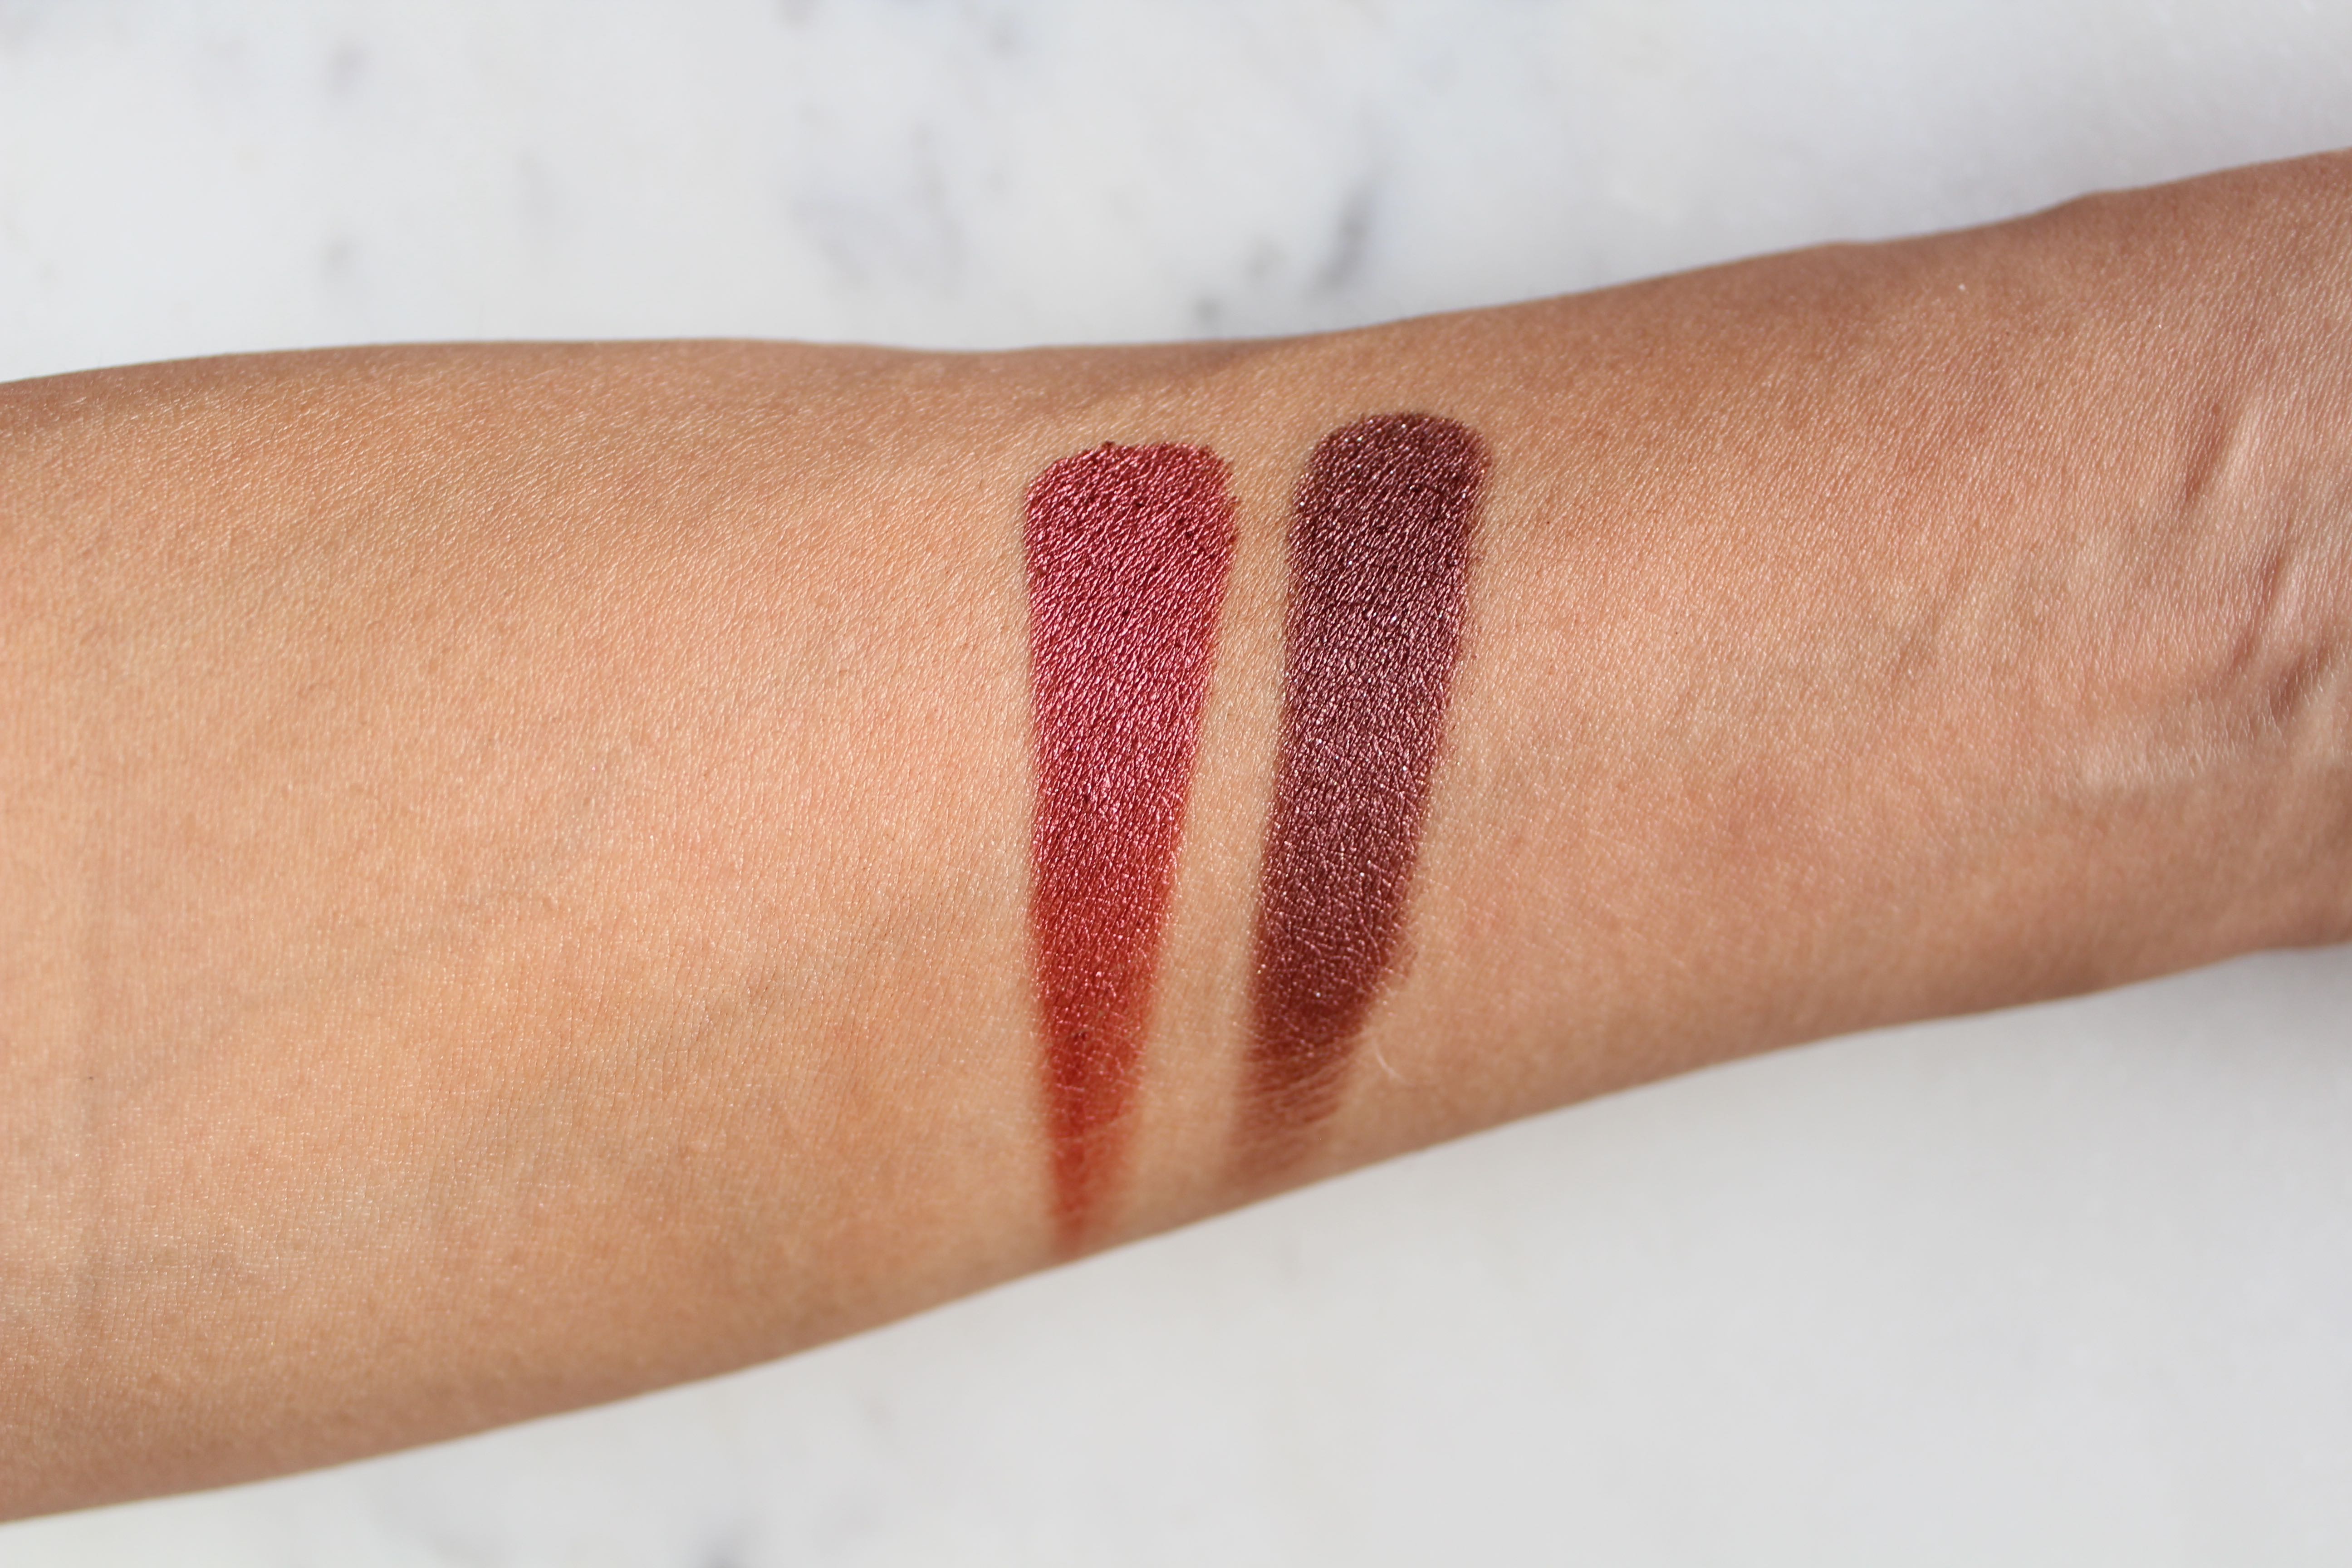 NEW Makeup Geek Fall 2016 Eyeshadows - Review & Swatches by Facemadeup.com